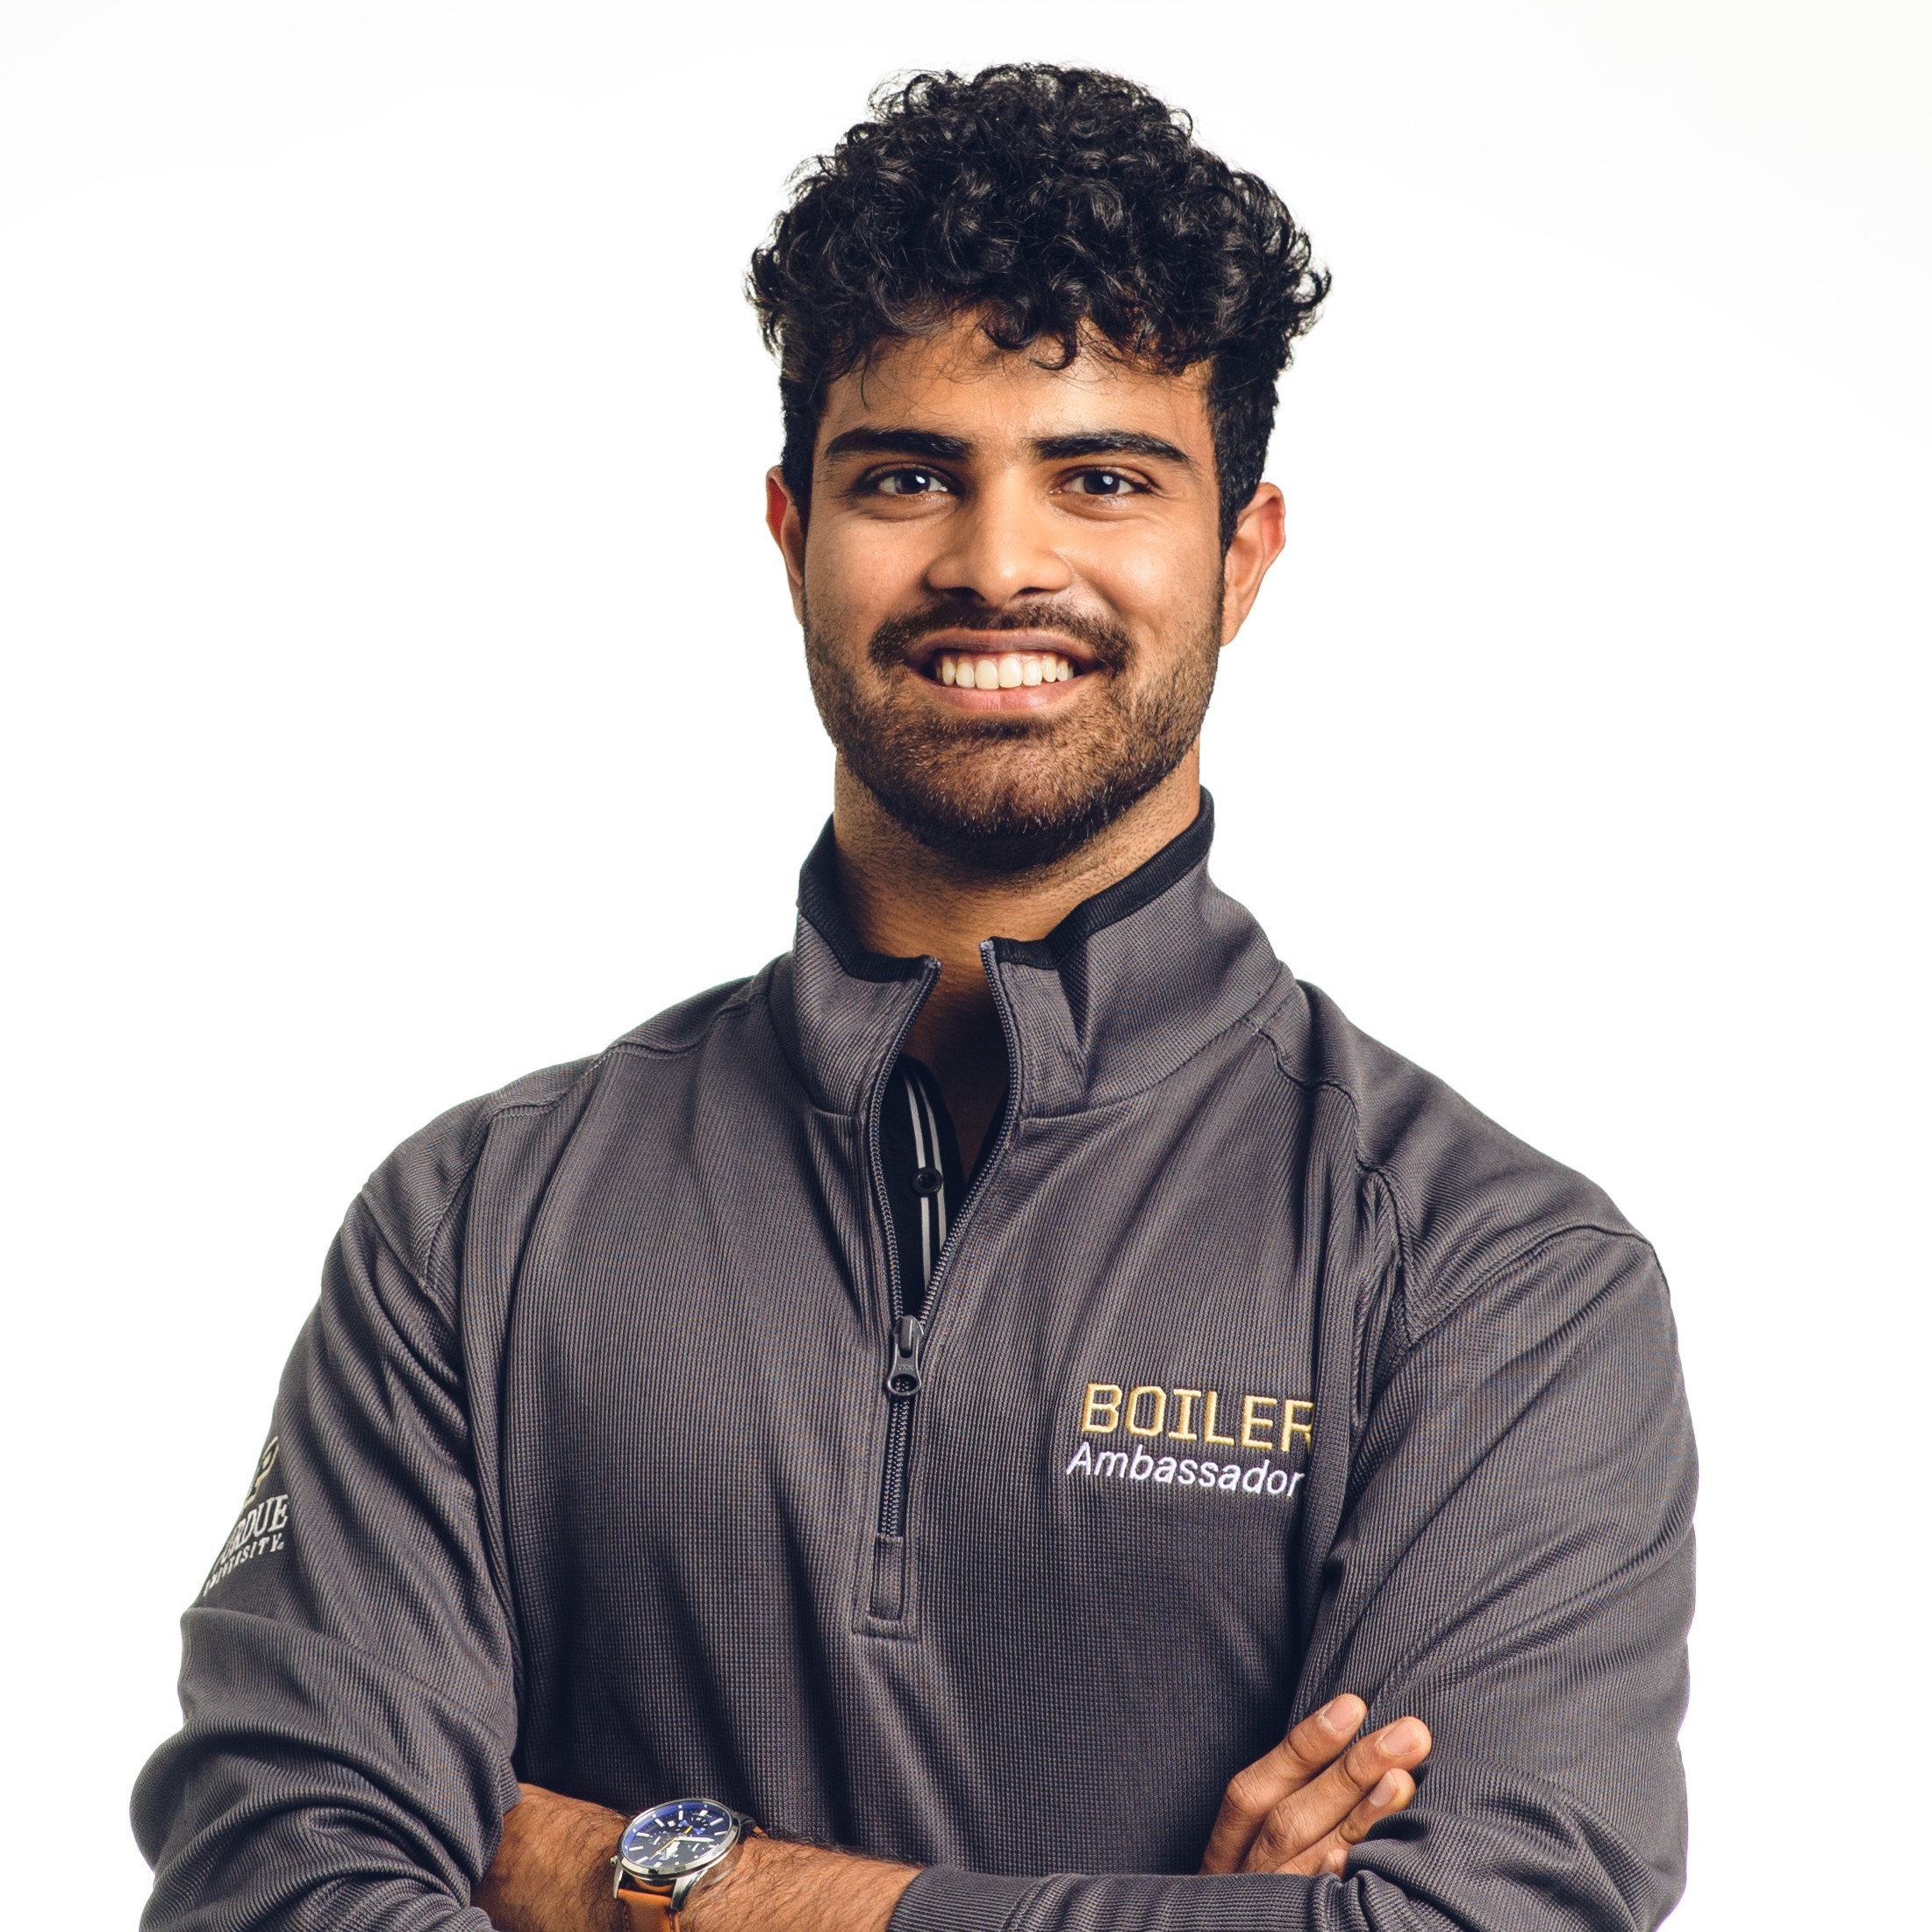 Atharva stands with arms crossed wearing a gray Purdue polo shirt.